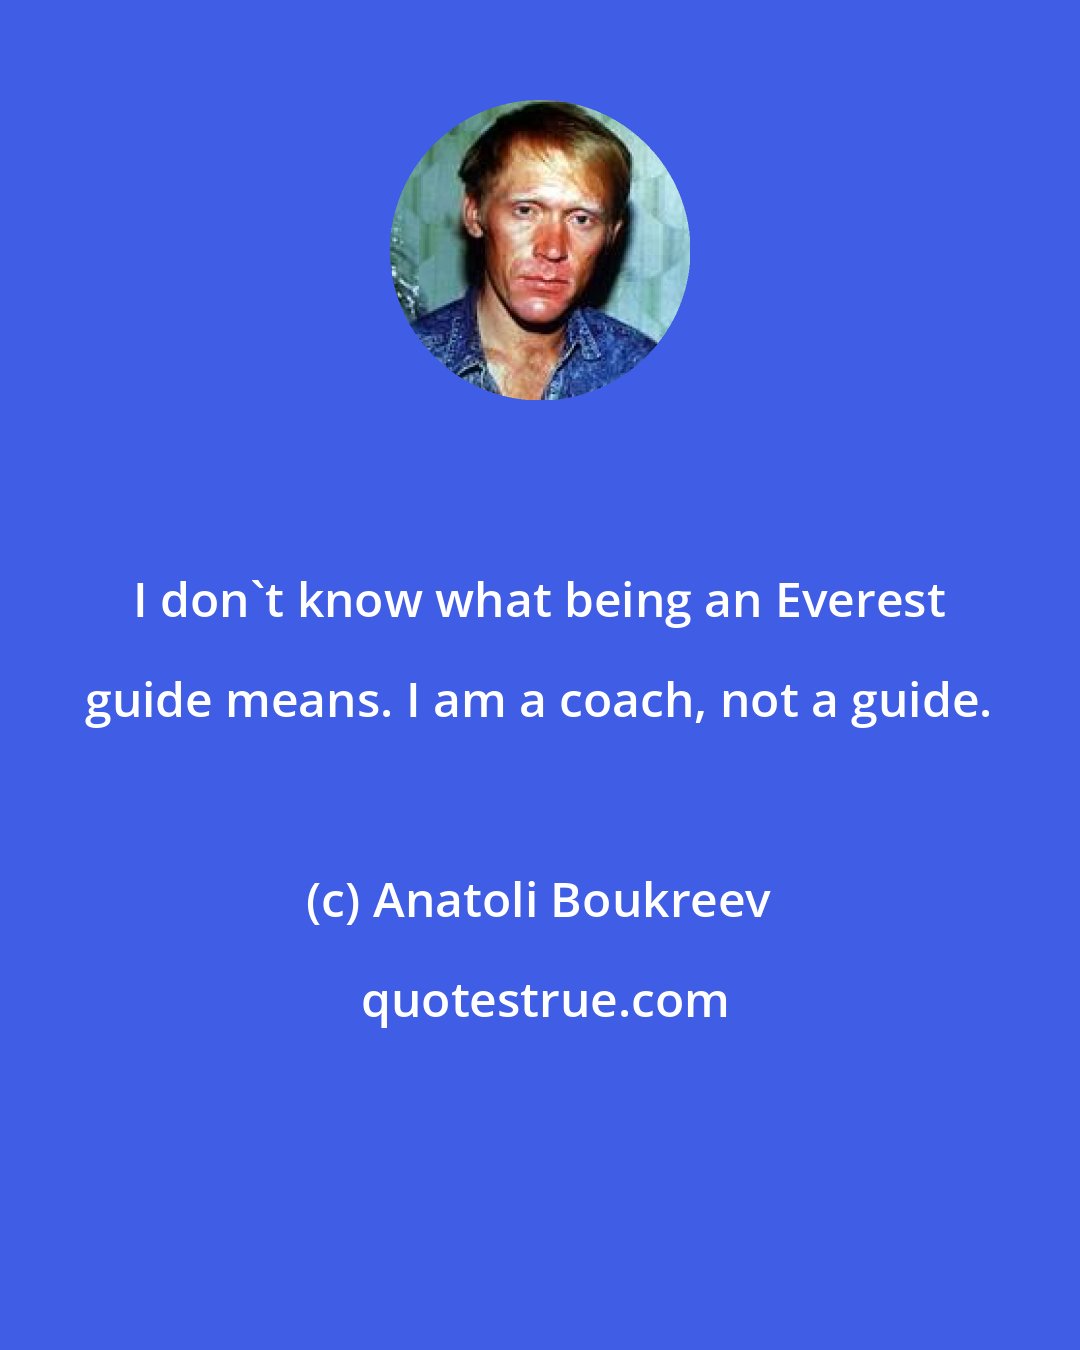 Anatoli Boukreev: I don't know what being an Everest guide means. I am a coach, not a guide.